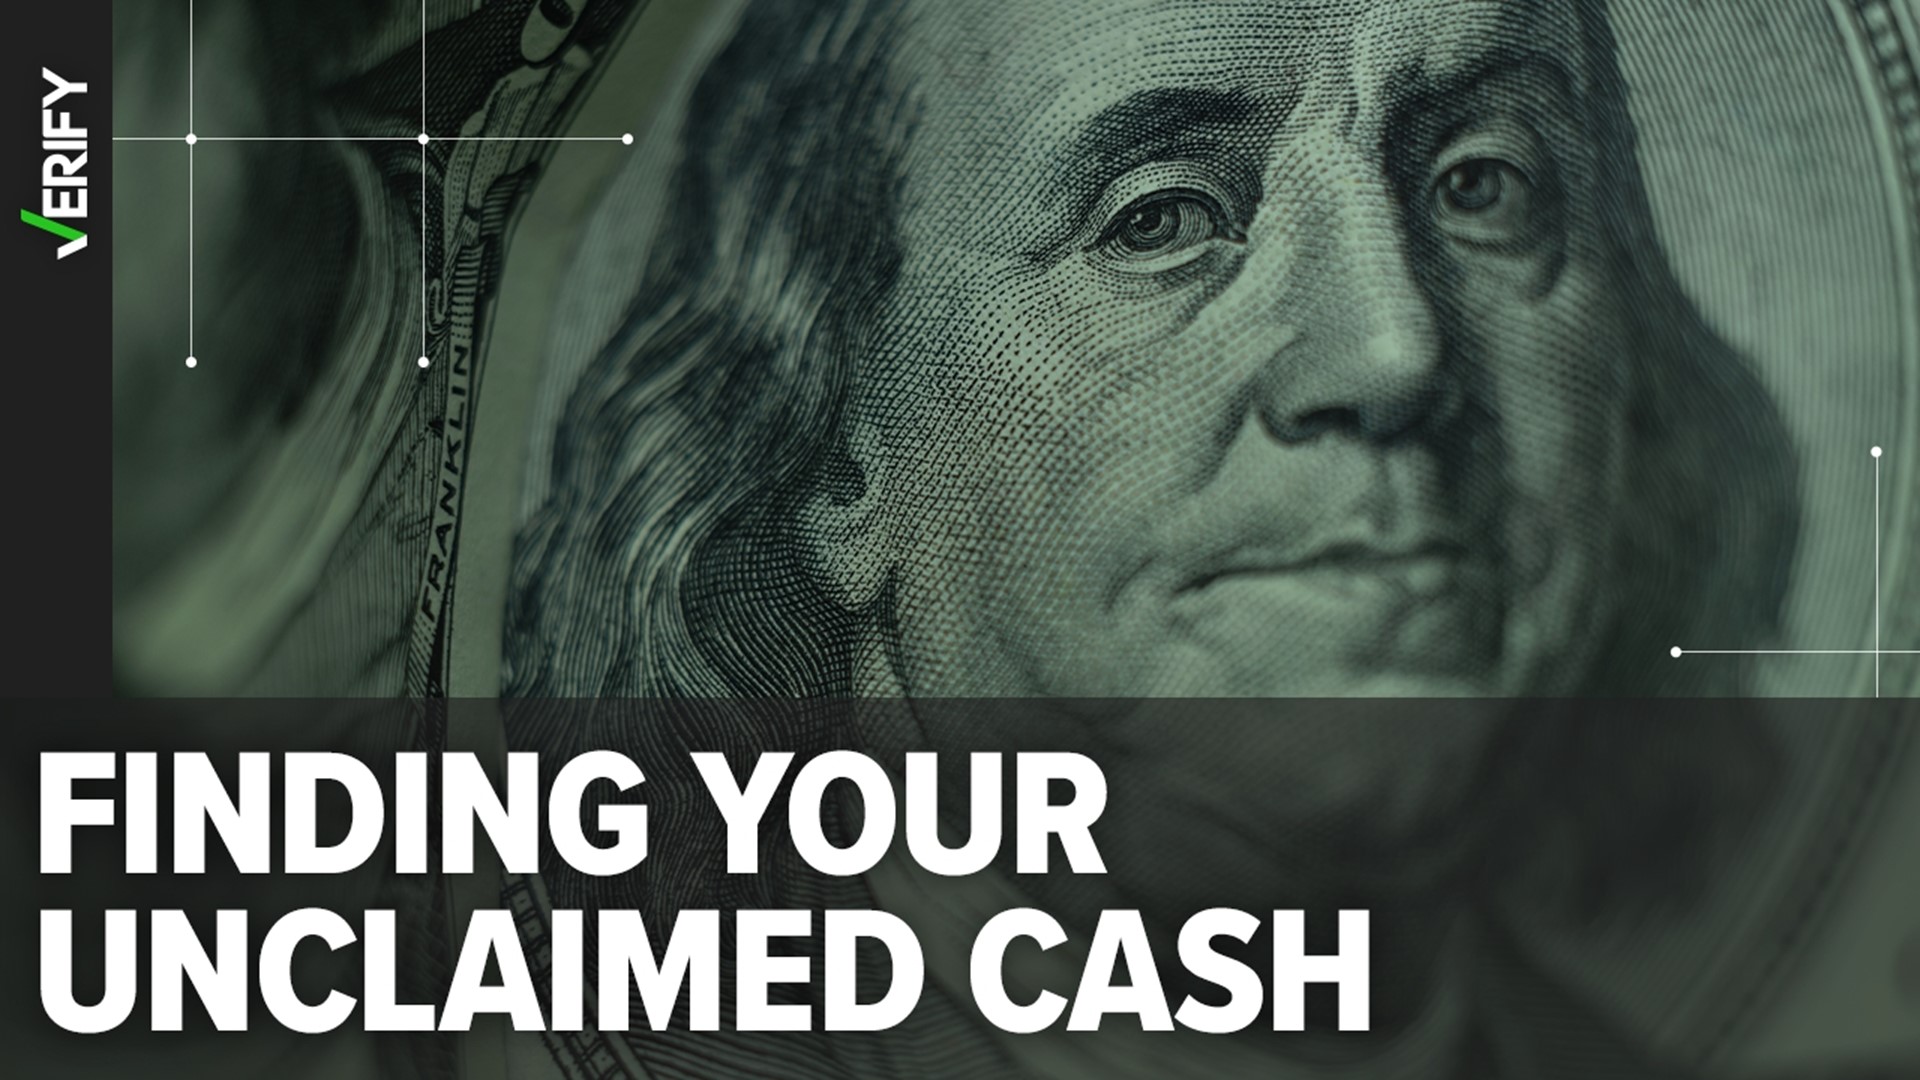 It is free to search for and claim unclaimed property in the U.S. Here are tips on how to claim unclaimed money, property, or assets in your state, and report scams.